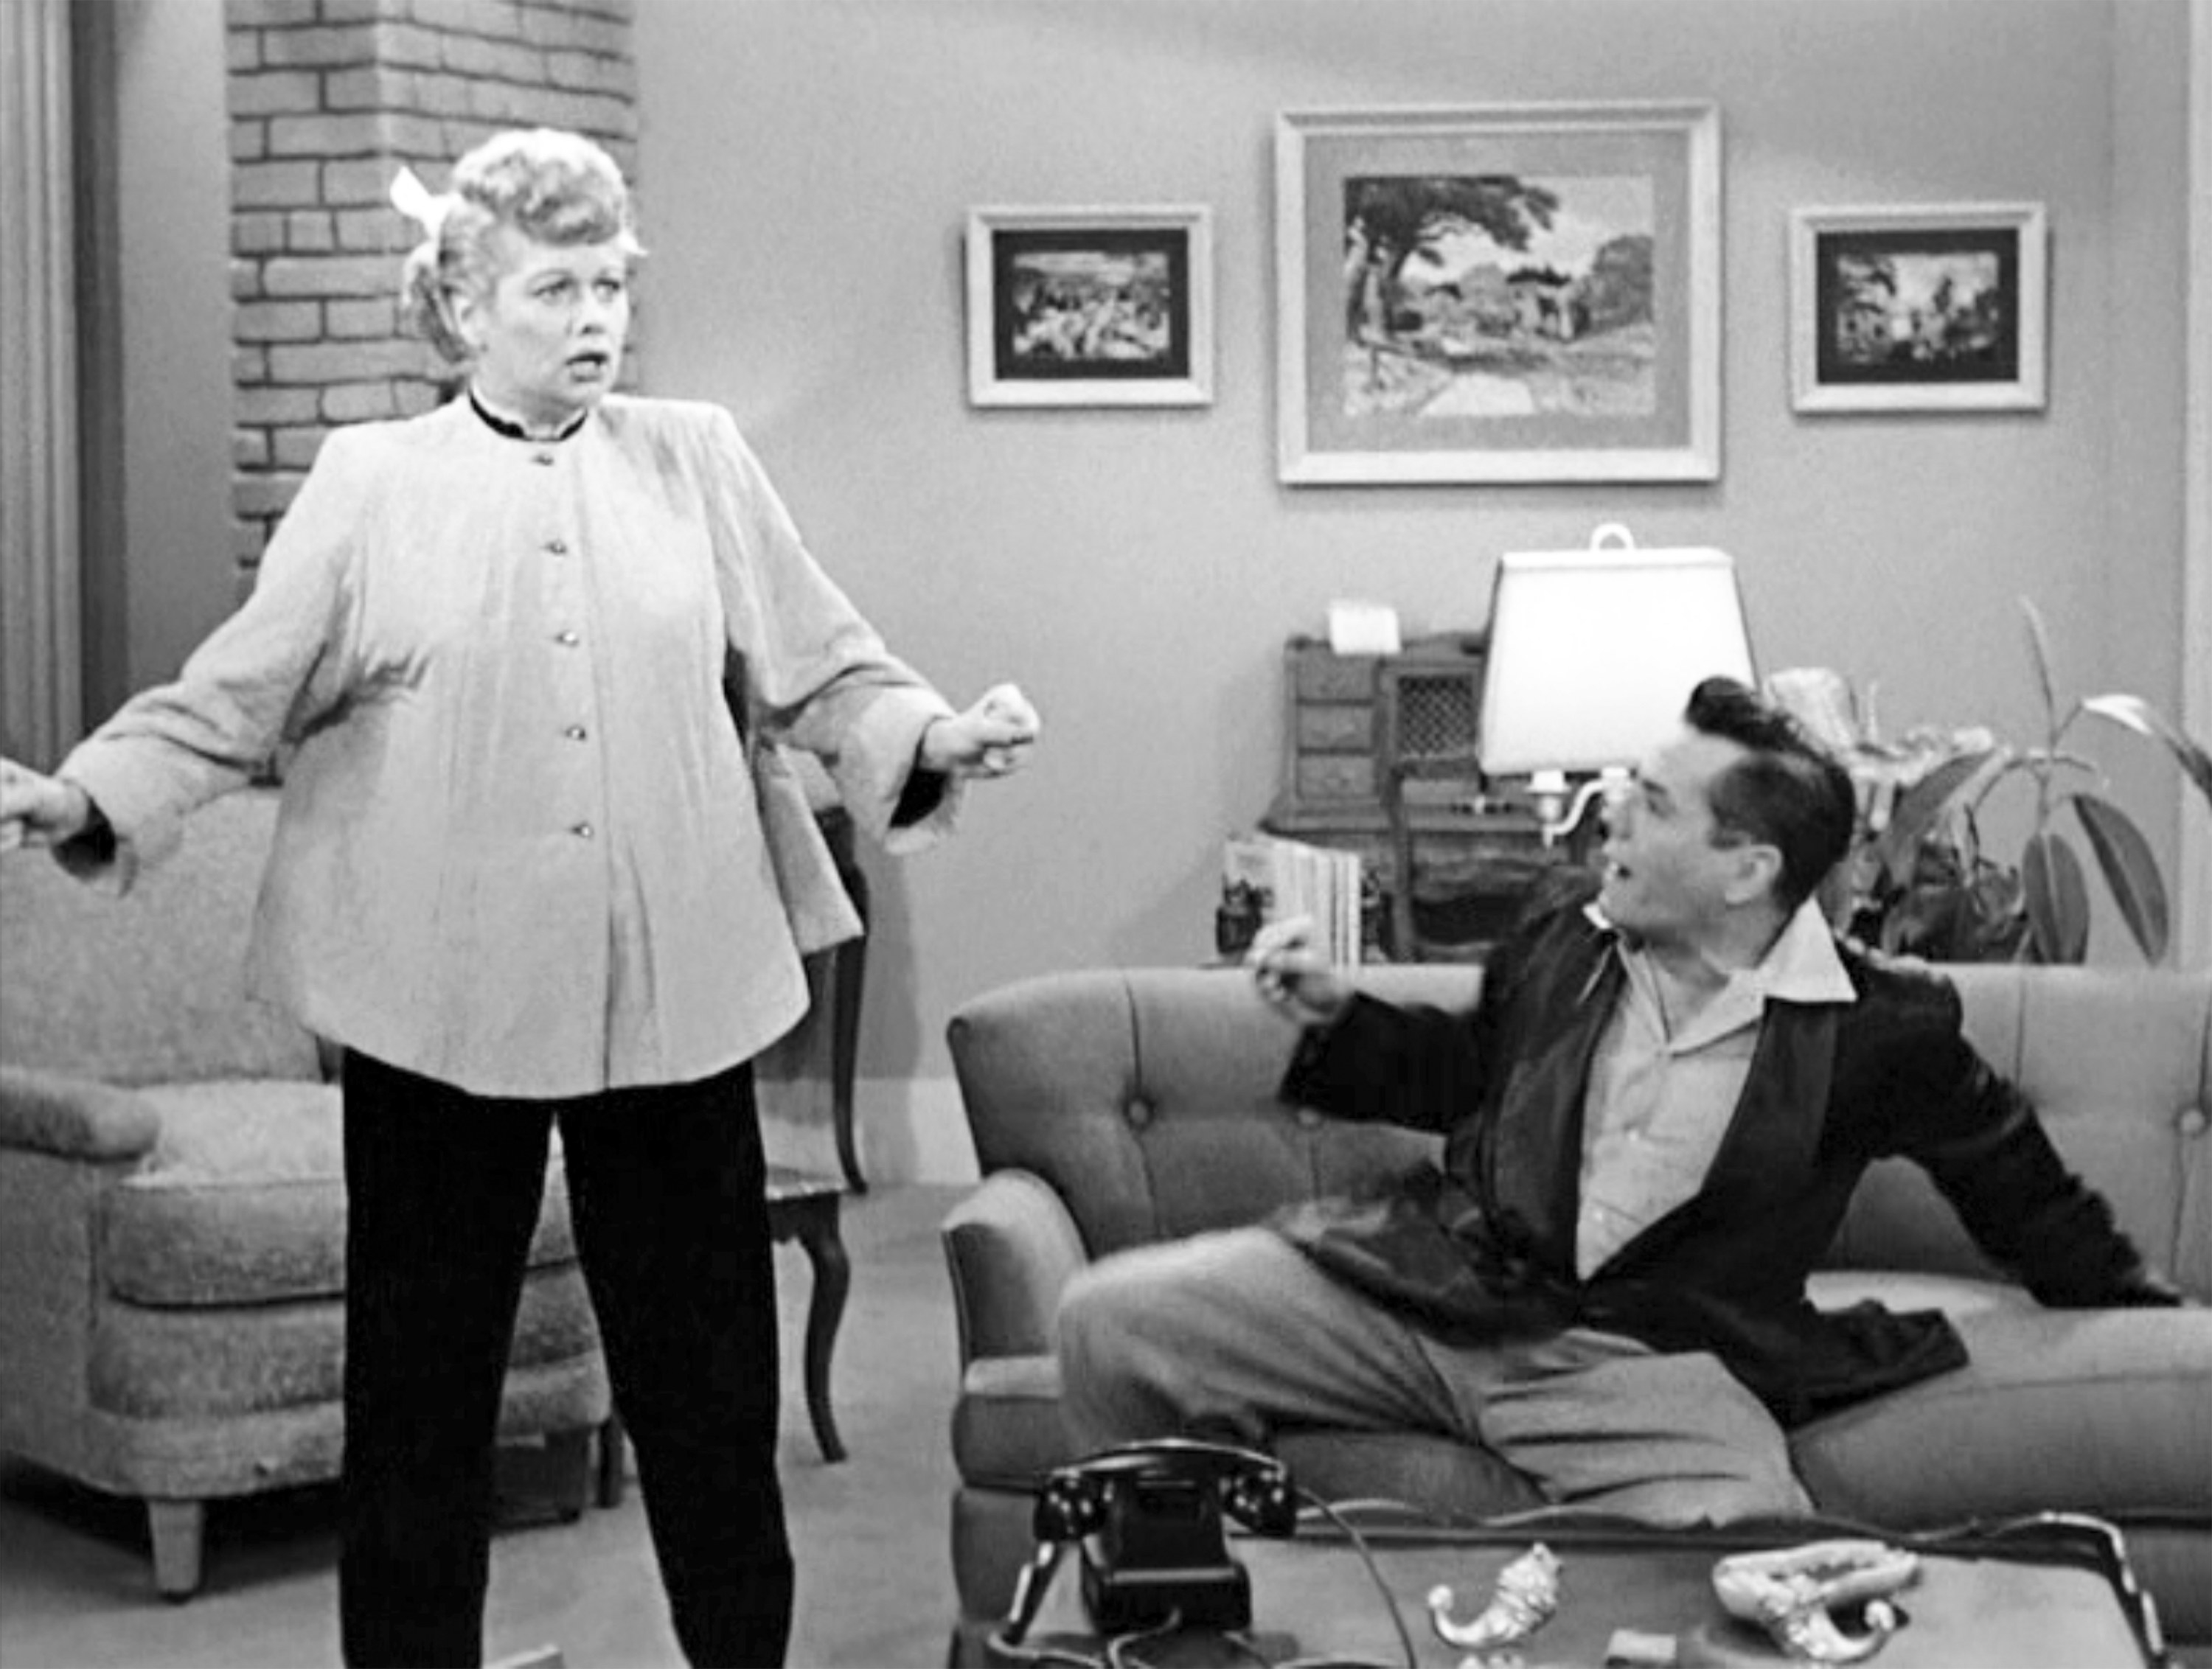 Lucille Ball (as a pregnant Lucy Ricardo) and Desi Arnaz (as Ricky Ricardo) in the &quot;I Love Lucy&quot; episode &#x27;The Black Eye,&#x27; originally broadcast March 9, 1953